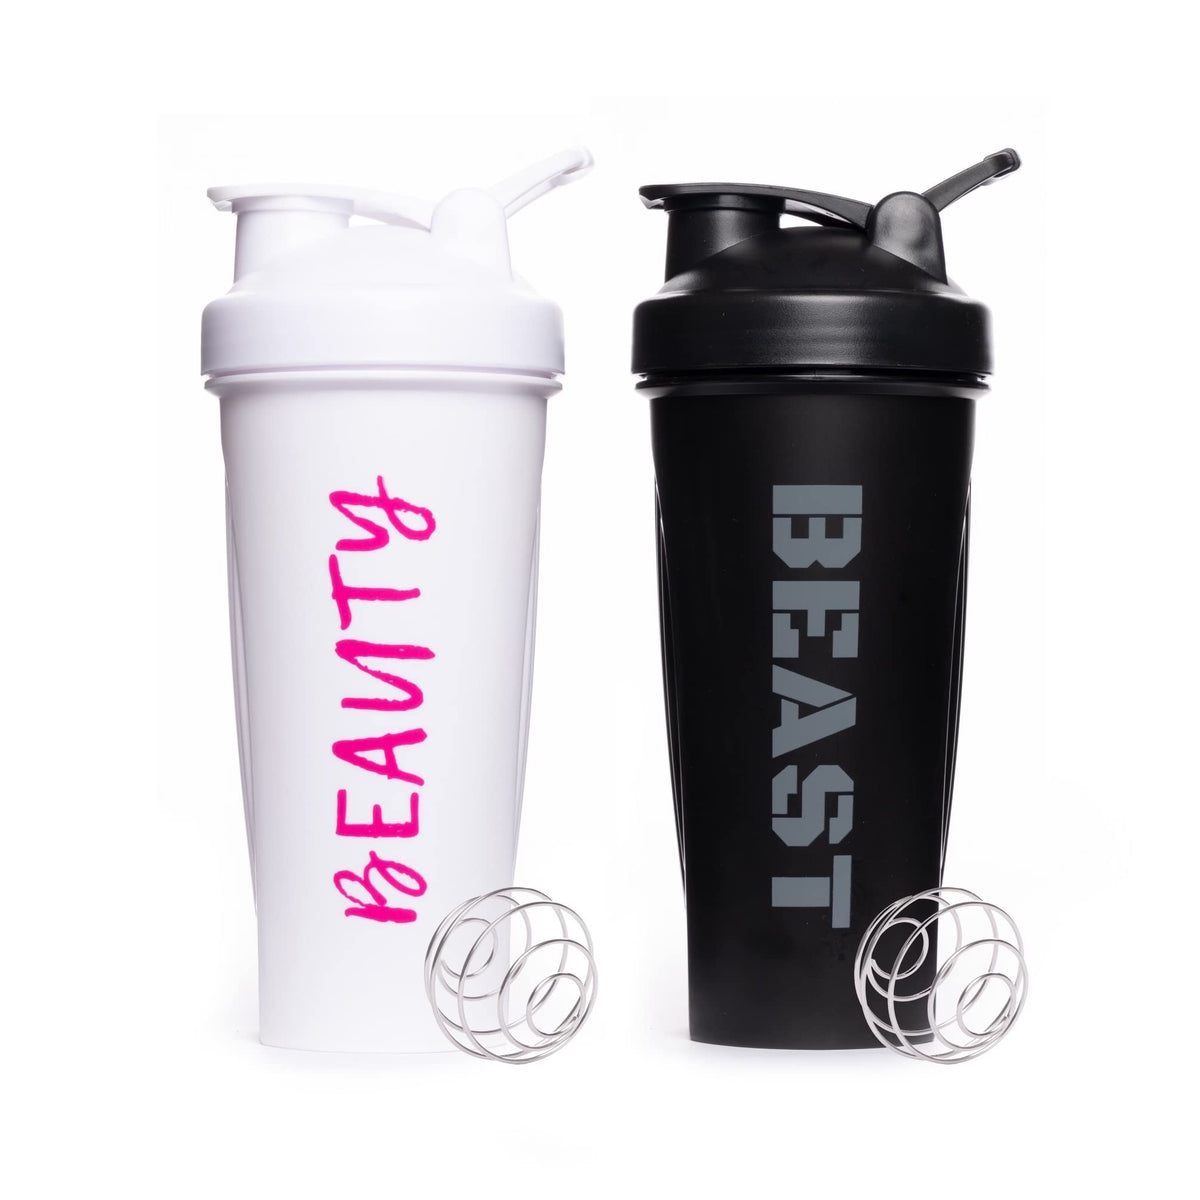 16 oz Plastic Fitness Shaker Bottle w/Mixer and Carry Handle